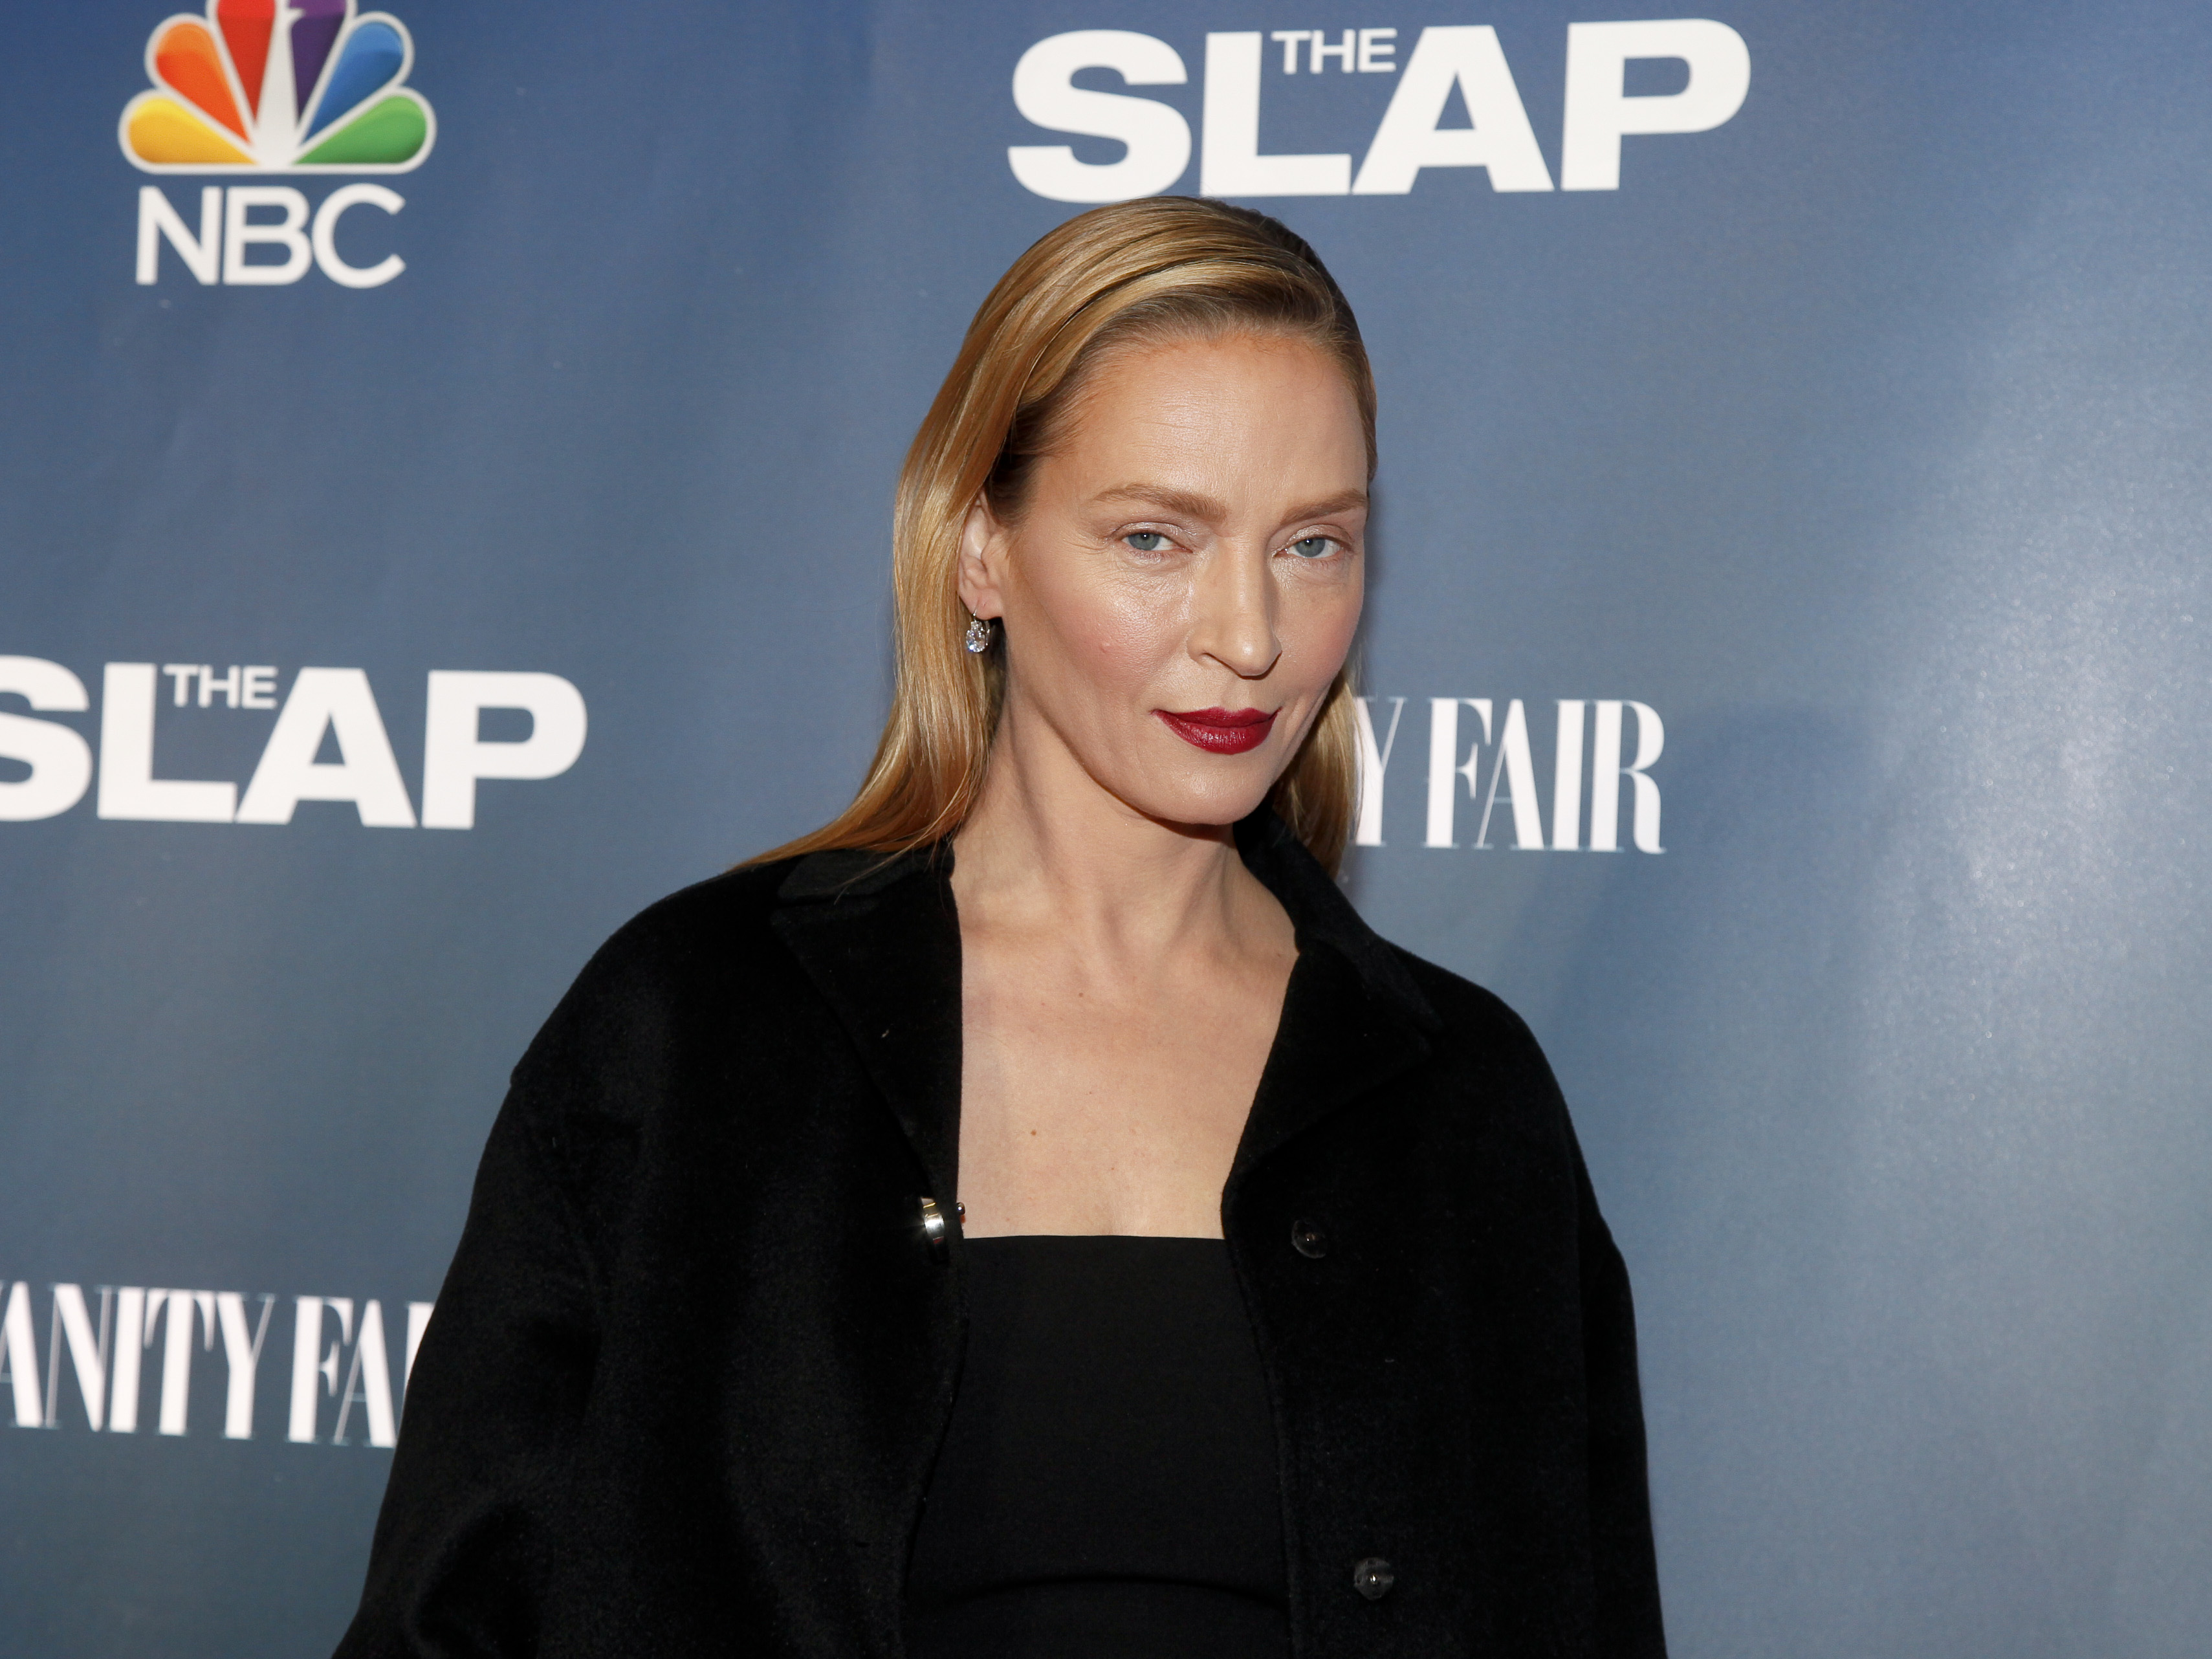 Uma Thurman attends NBC's "The Slap" miniseries premiere party at the New Museum on Monday, Feb. 9, 2015, in New York. (Photo by Andy Kropa/Invision/AP) (Andy Kropa&mdash;Andy Kropa /Invision/AP)